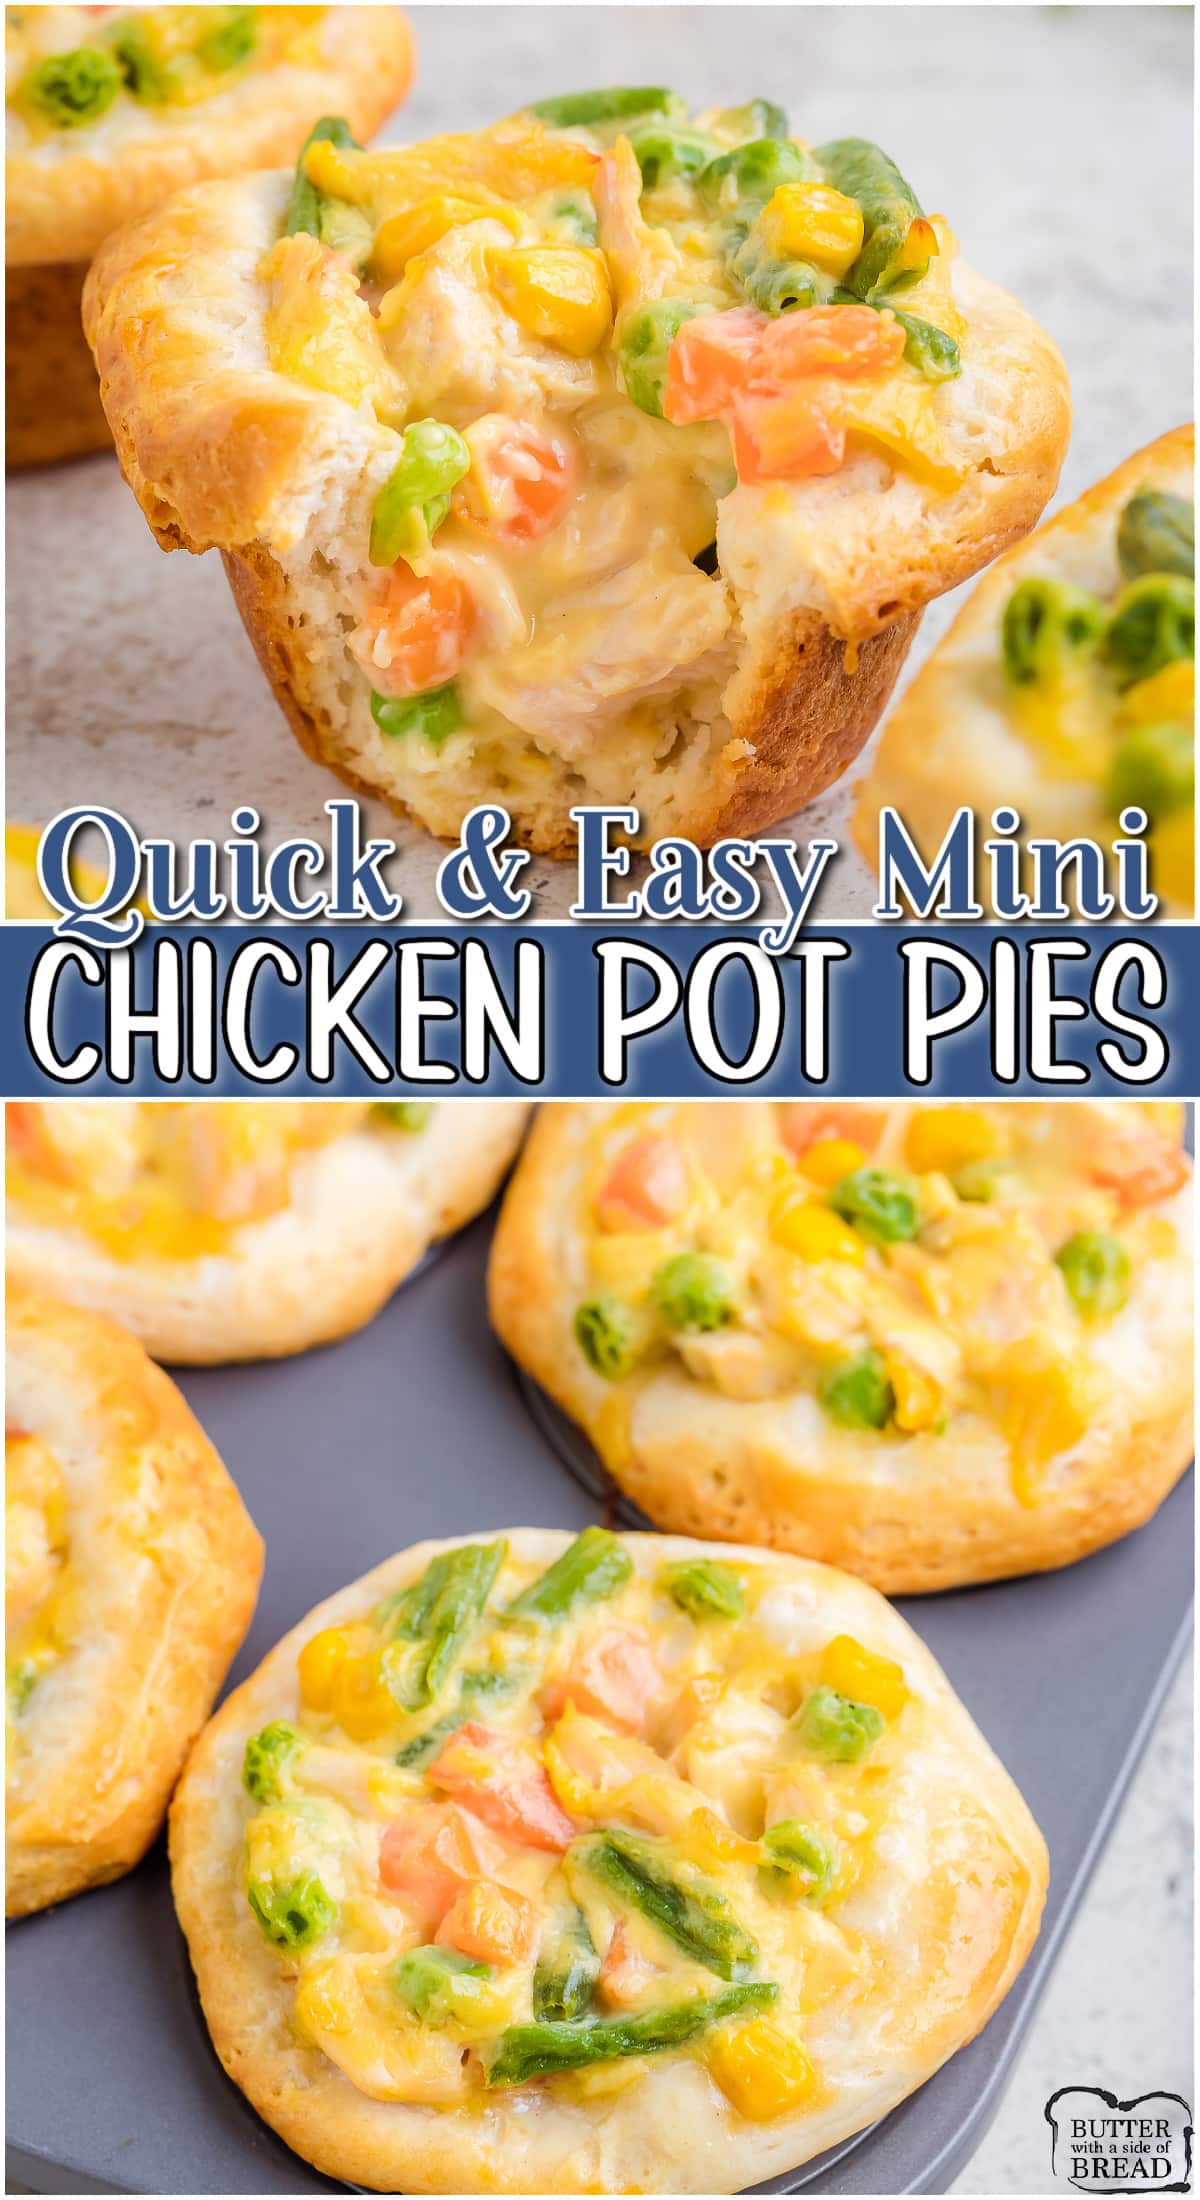 Muffin Tin Chicken Pot Pies made with just 4 simple ingredients in 20 minutes! Easy mini chicken pot pies with tender chicken & vegetables in a creamy sauce. Perfect weeknight dinner!